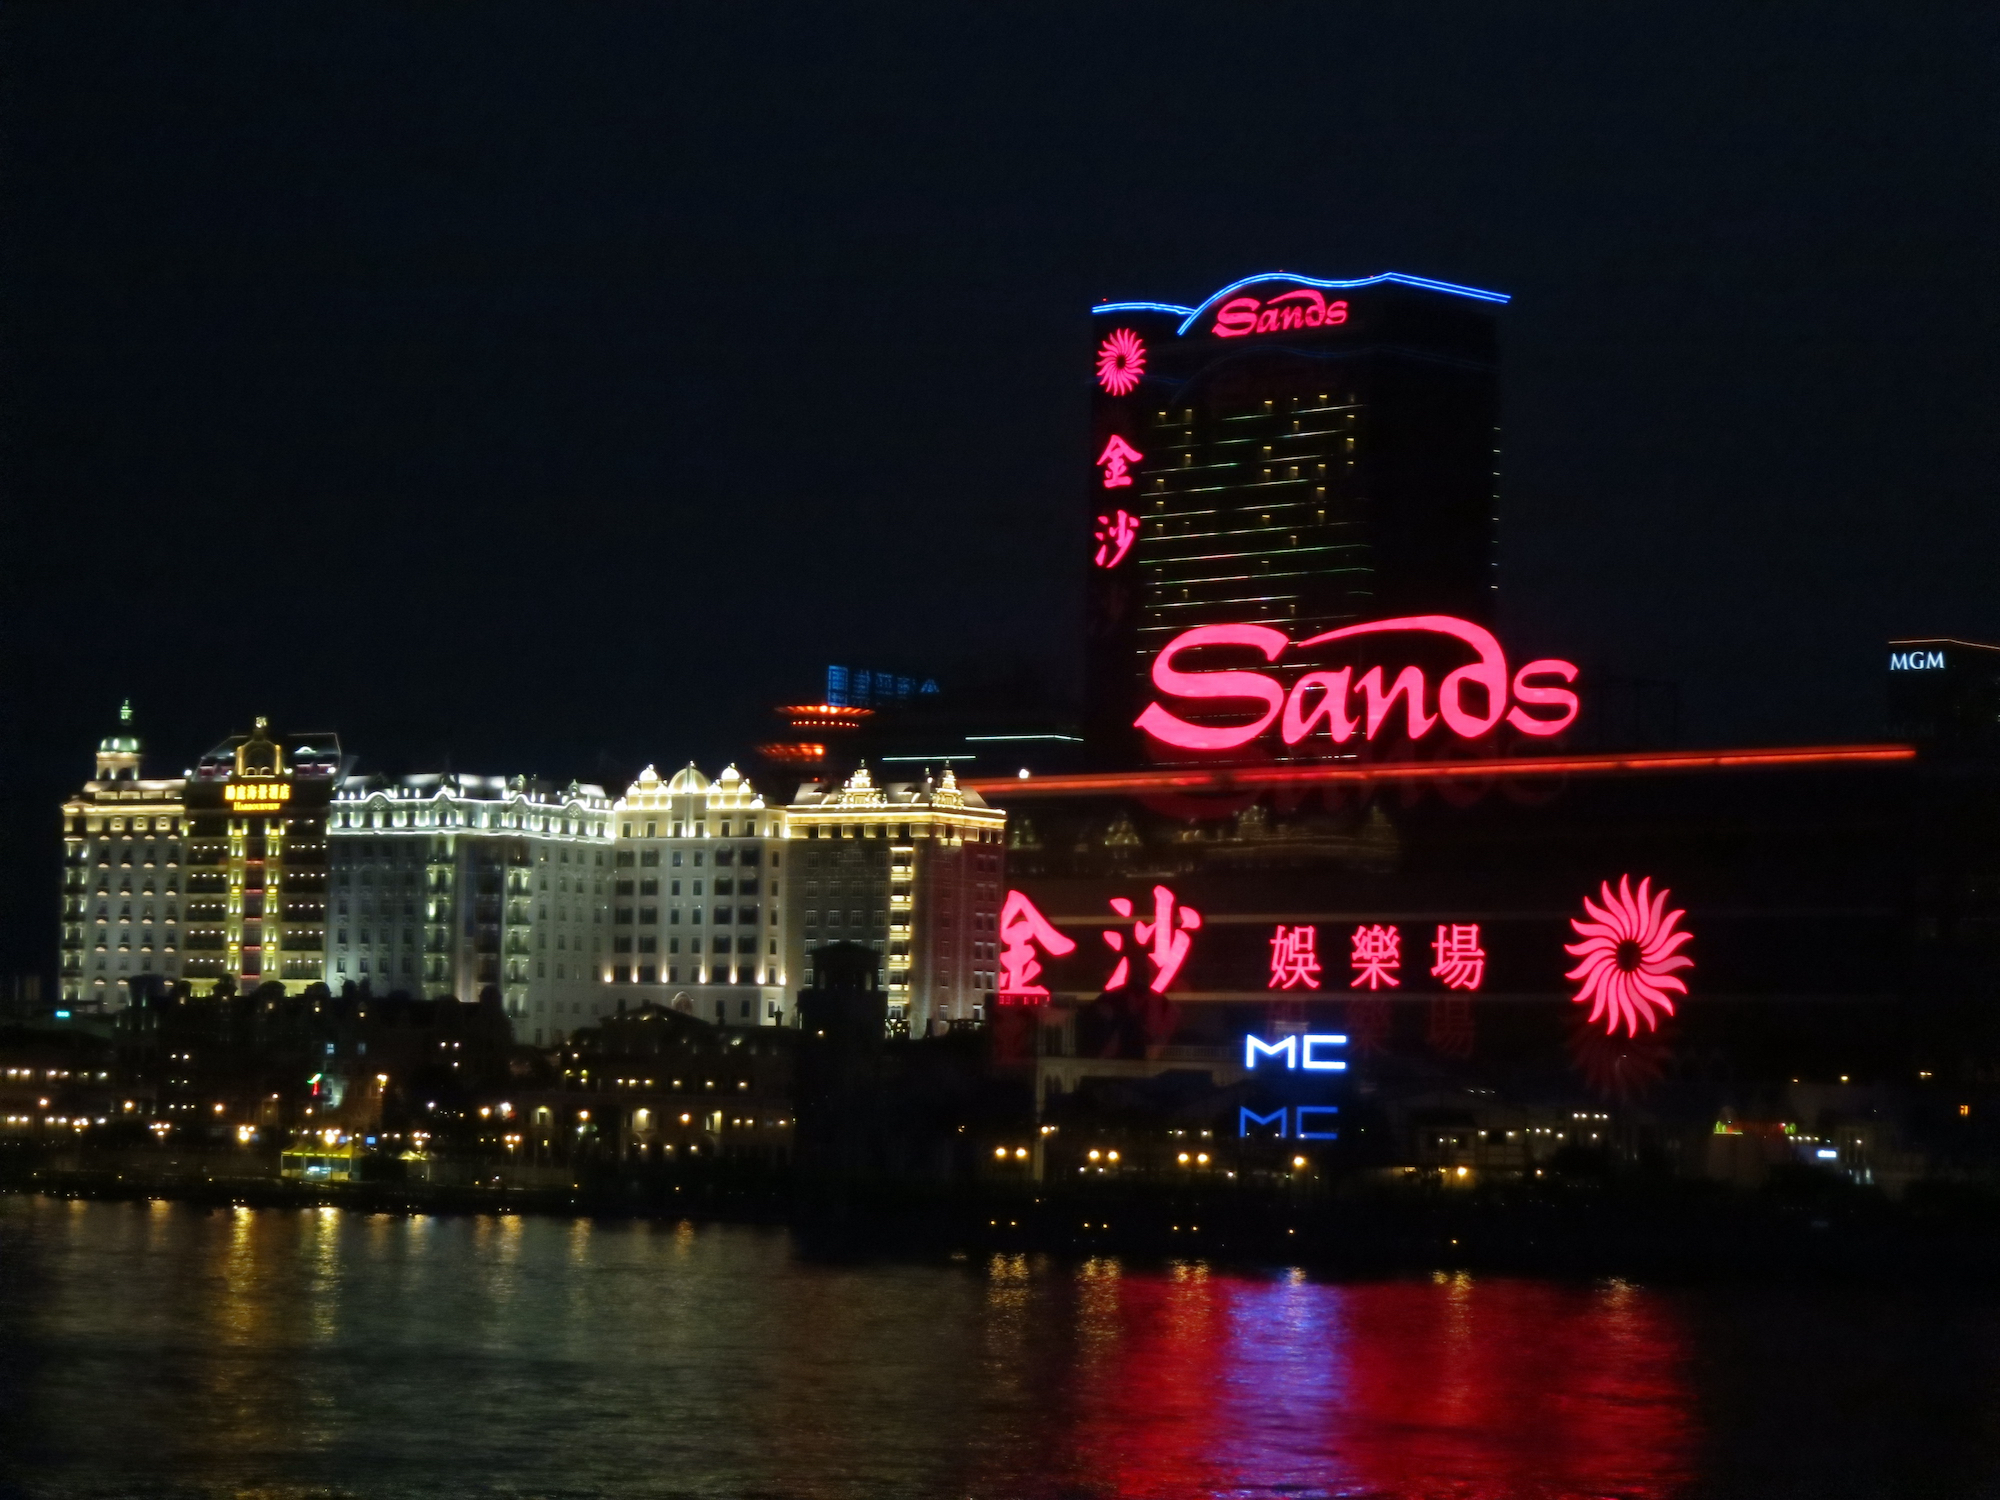 Las Vegas Sands stake in Sands China